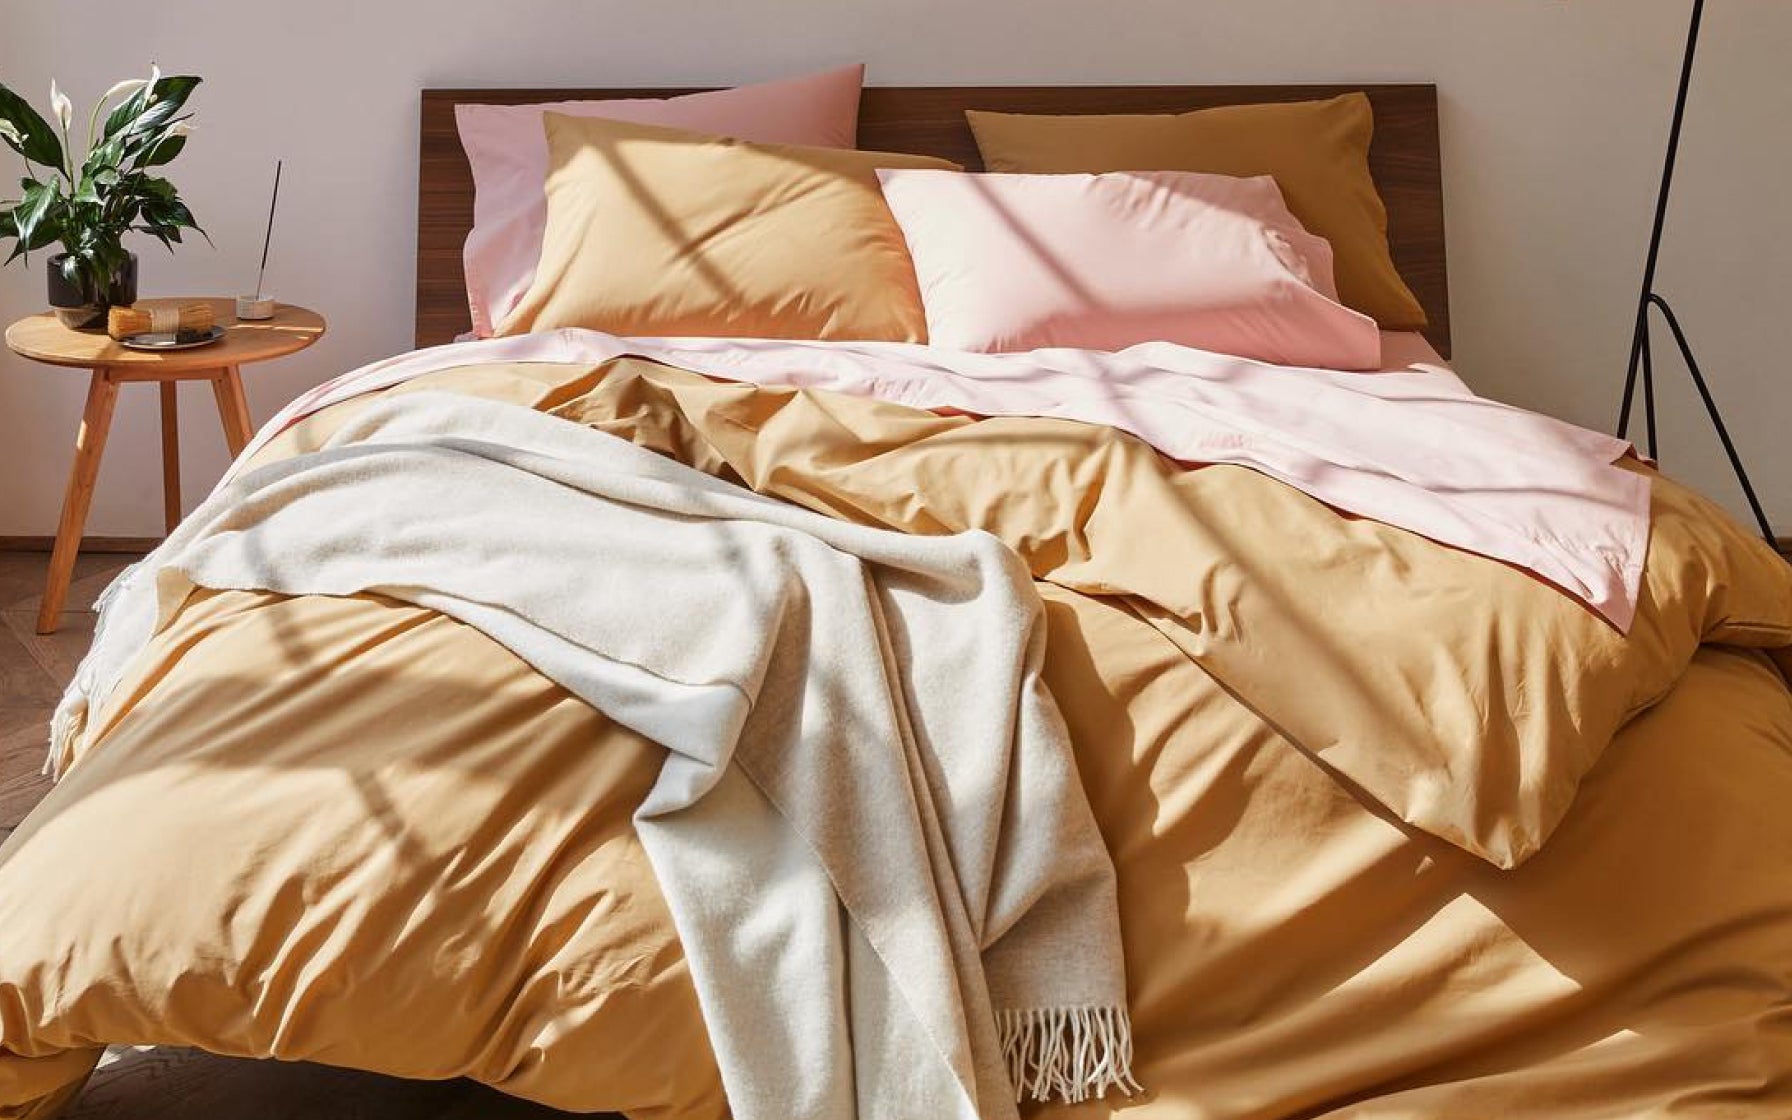 Brooklinen bedding and sheets